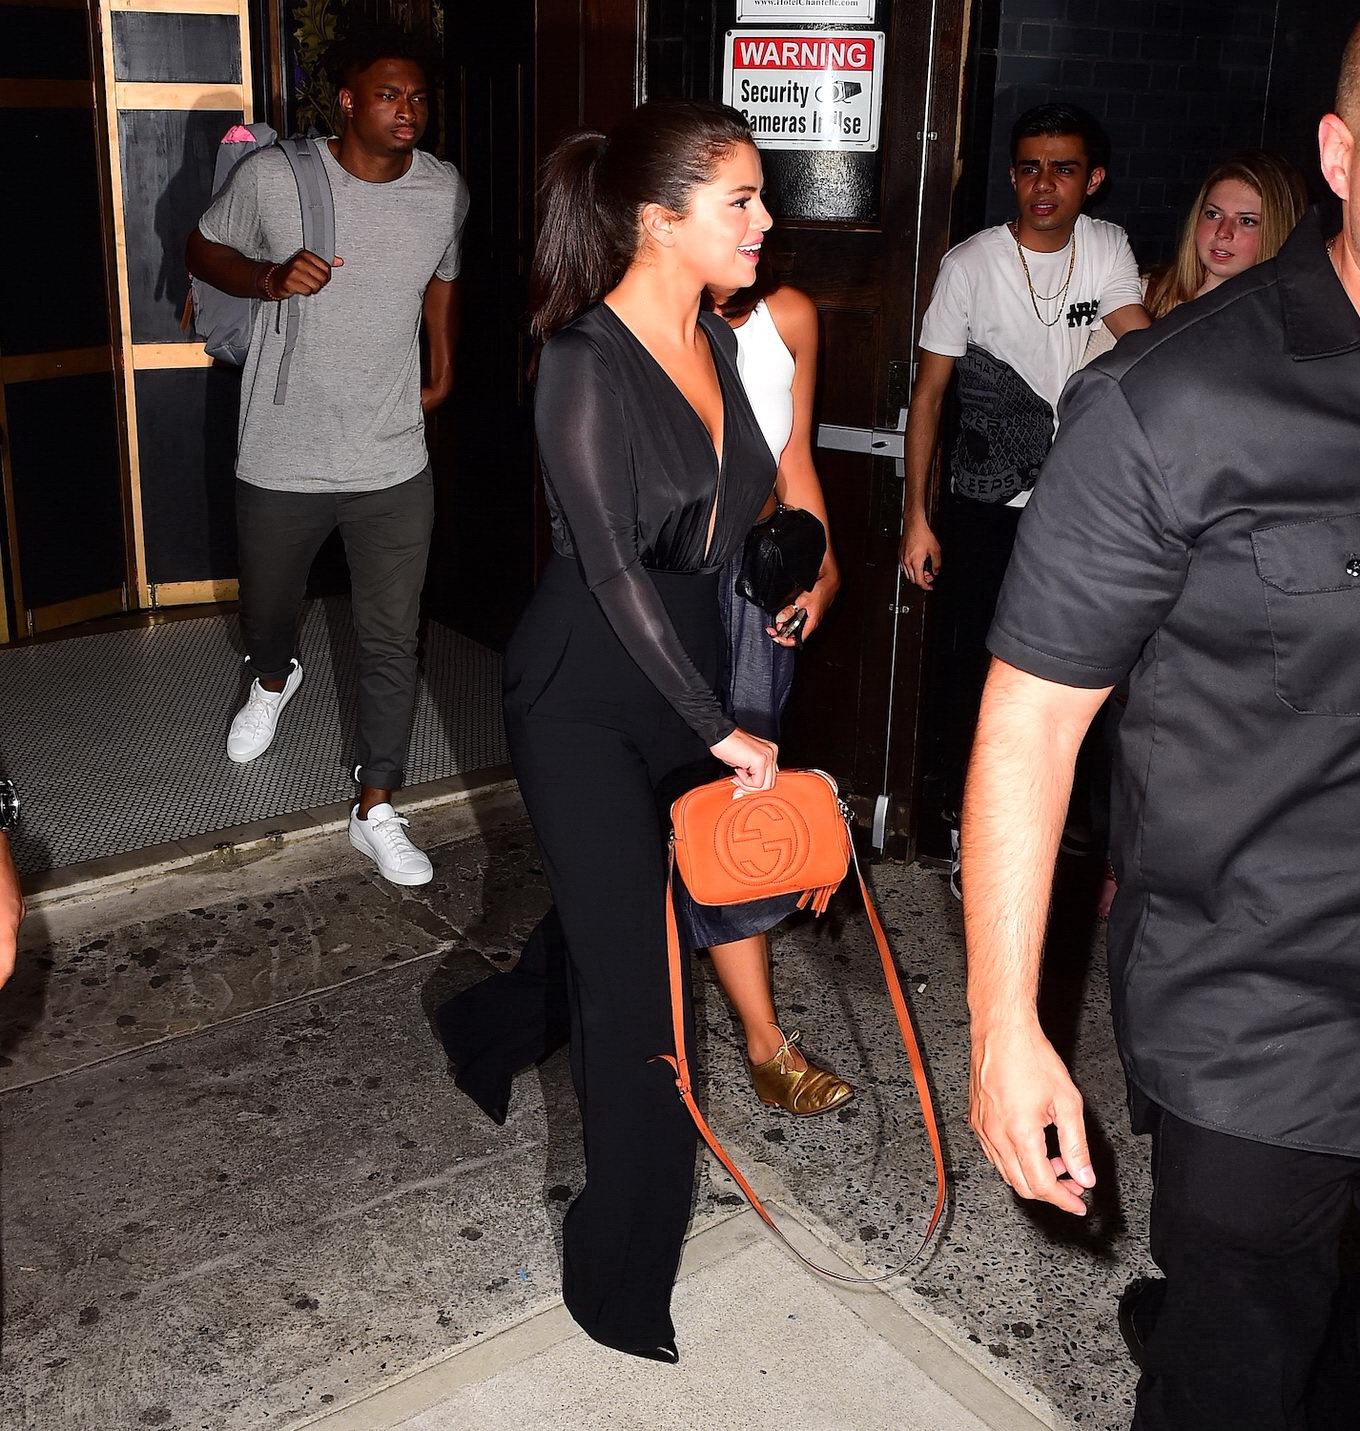 Selena Gomez braless wearing a wide open shirt on a night out #75160581